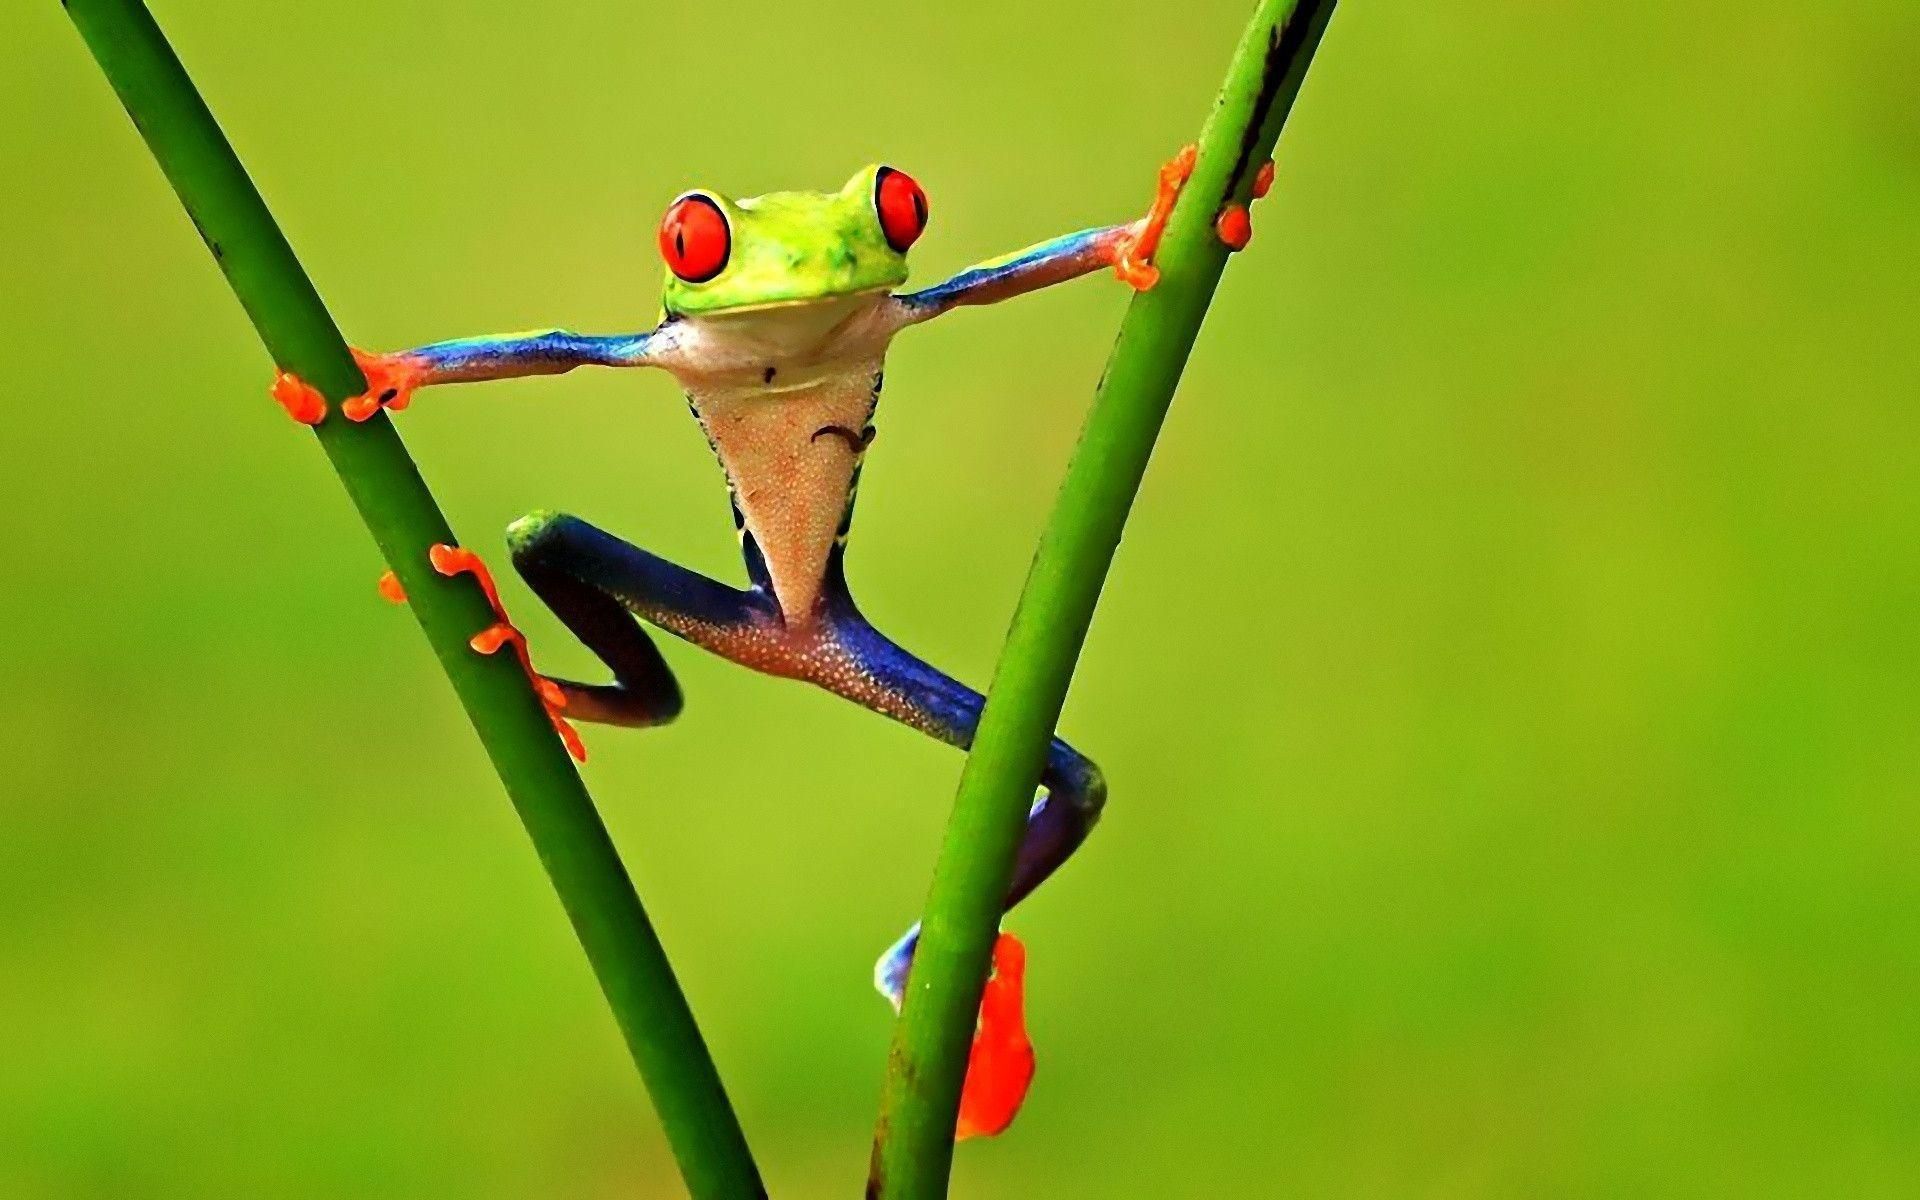 A red-eyed tree frog perched on a green stem. - Frog